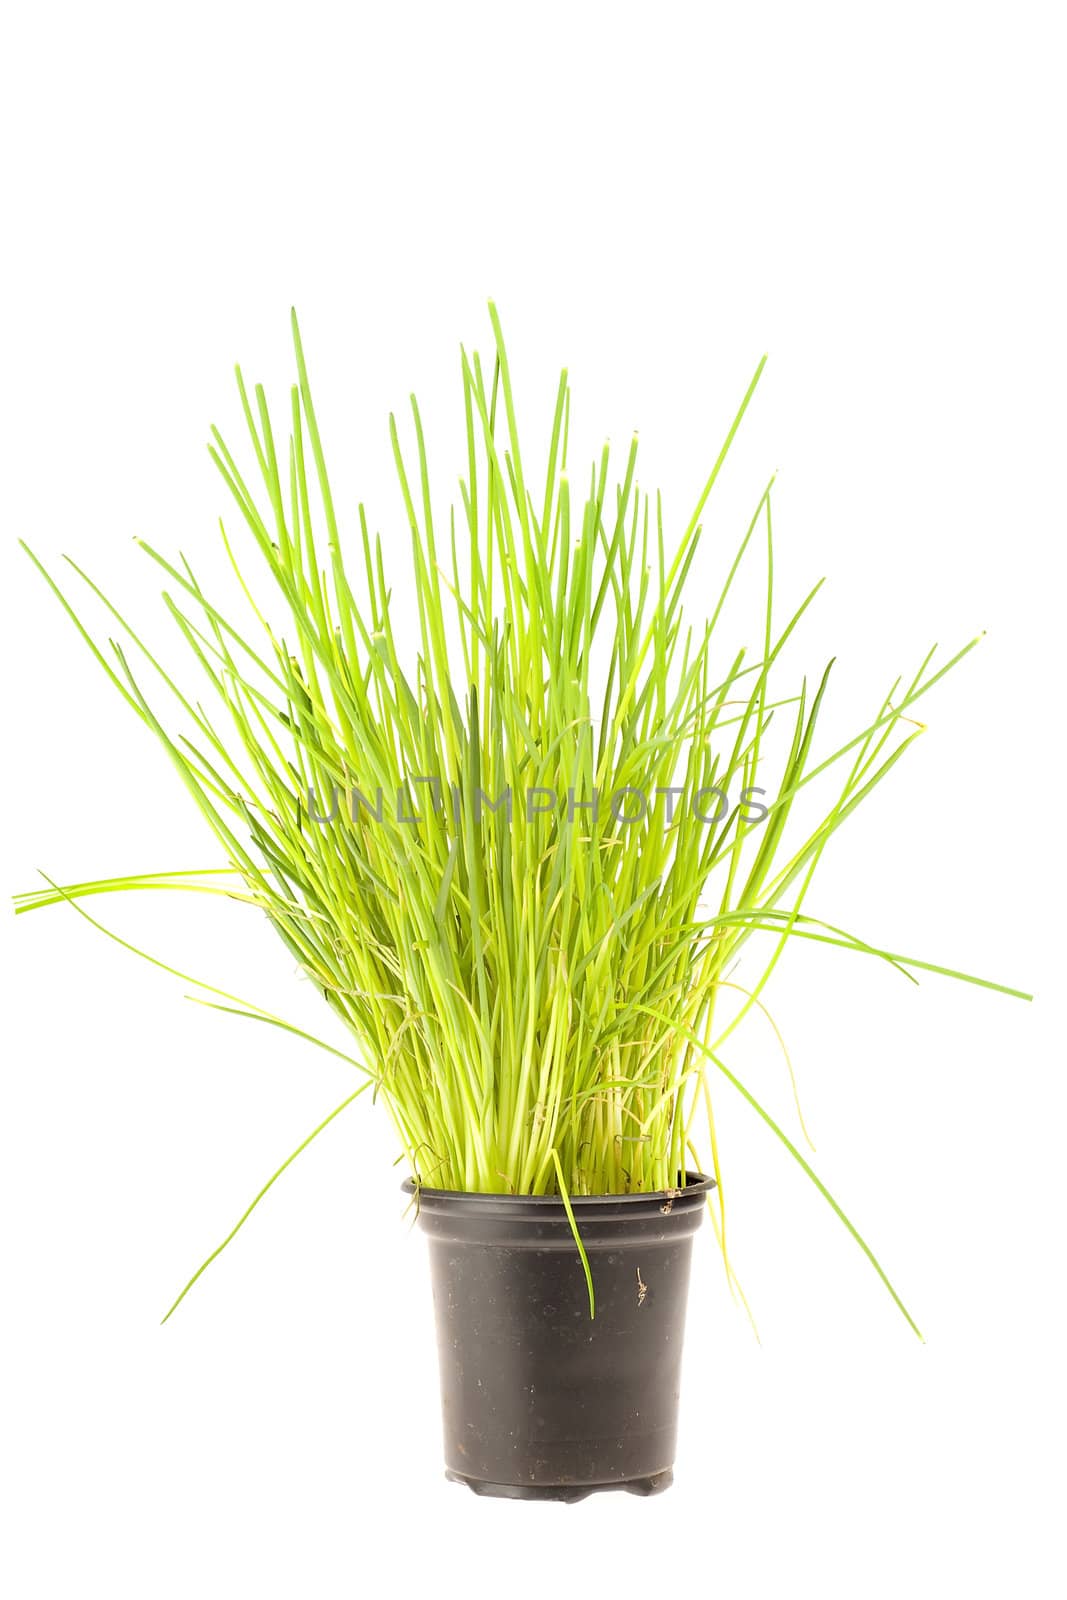 chive in a pot on a white background